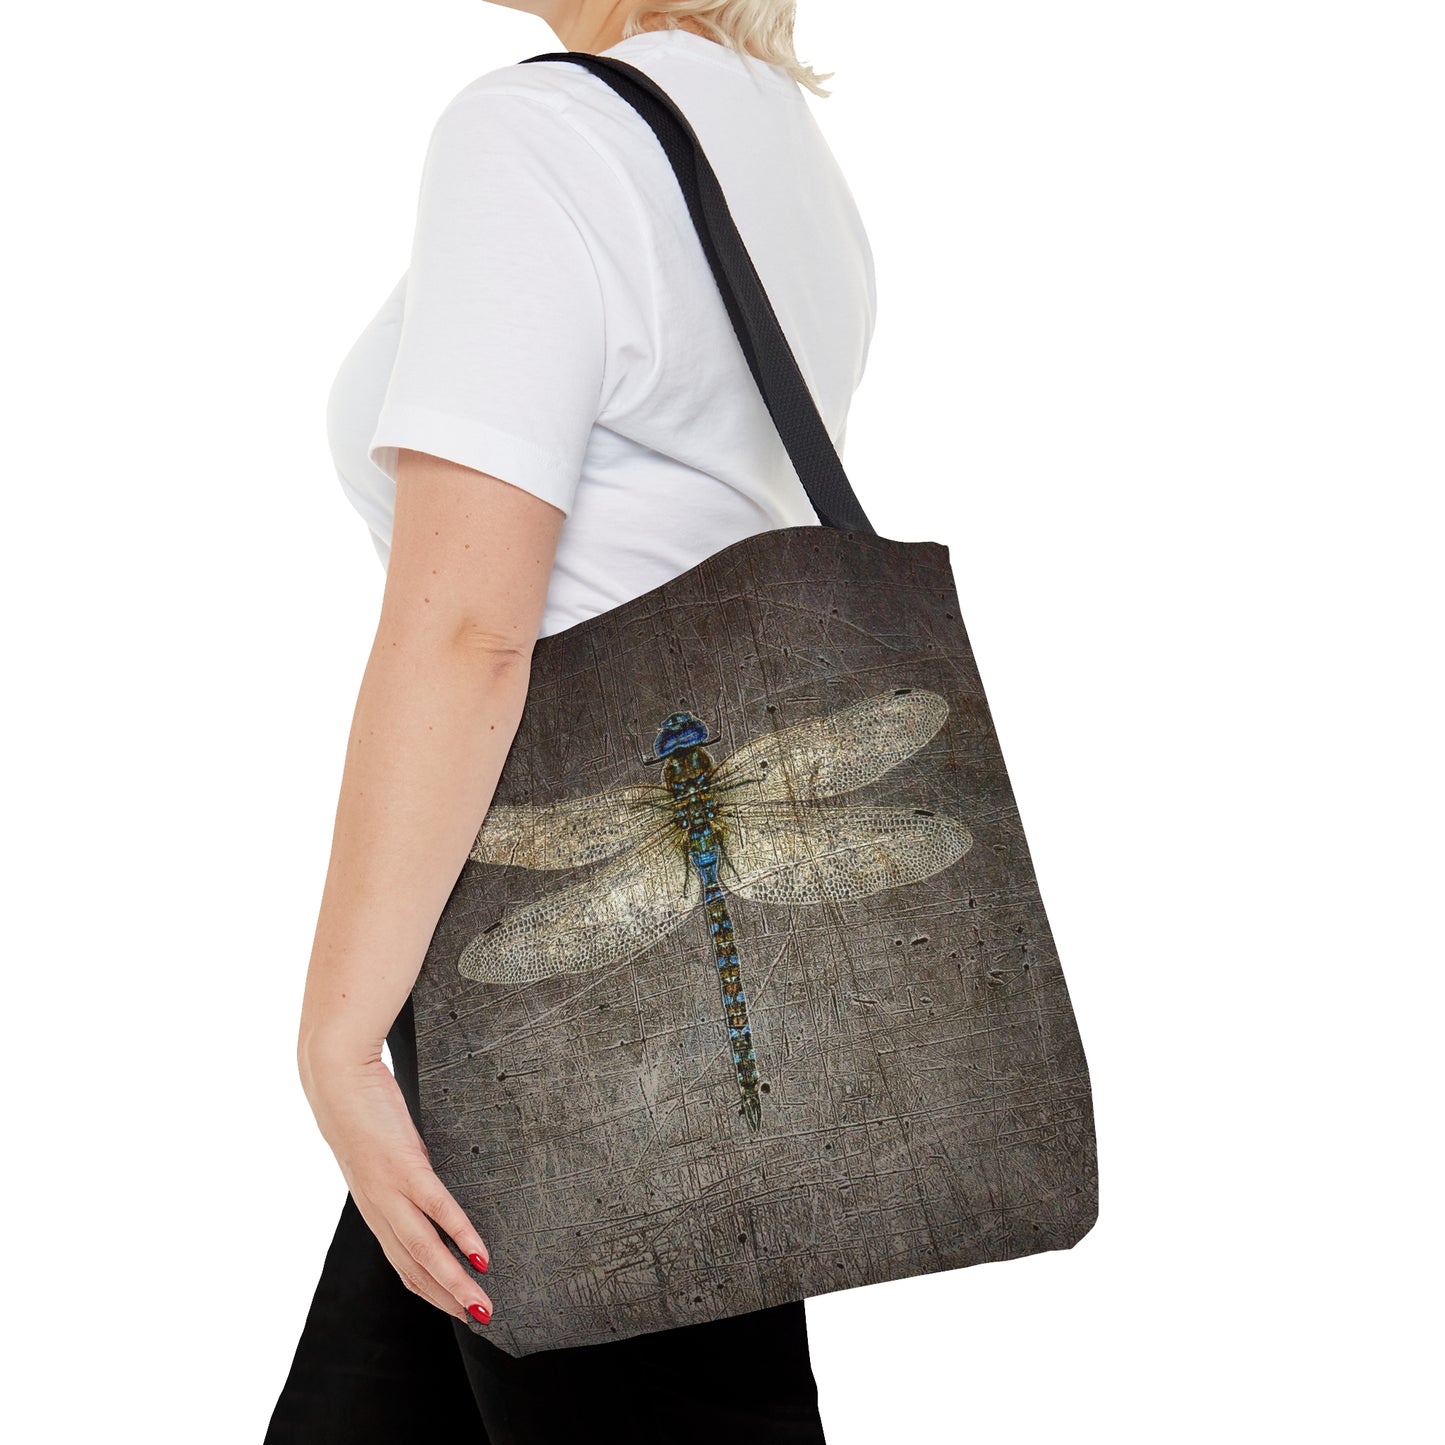 Dragonfly Themed Bags and Accessories - Dragonfly on Distressed Gray Stone Printed on Tote Bag